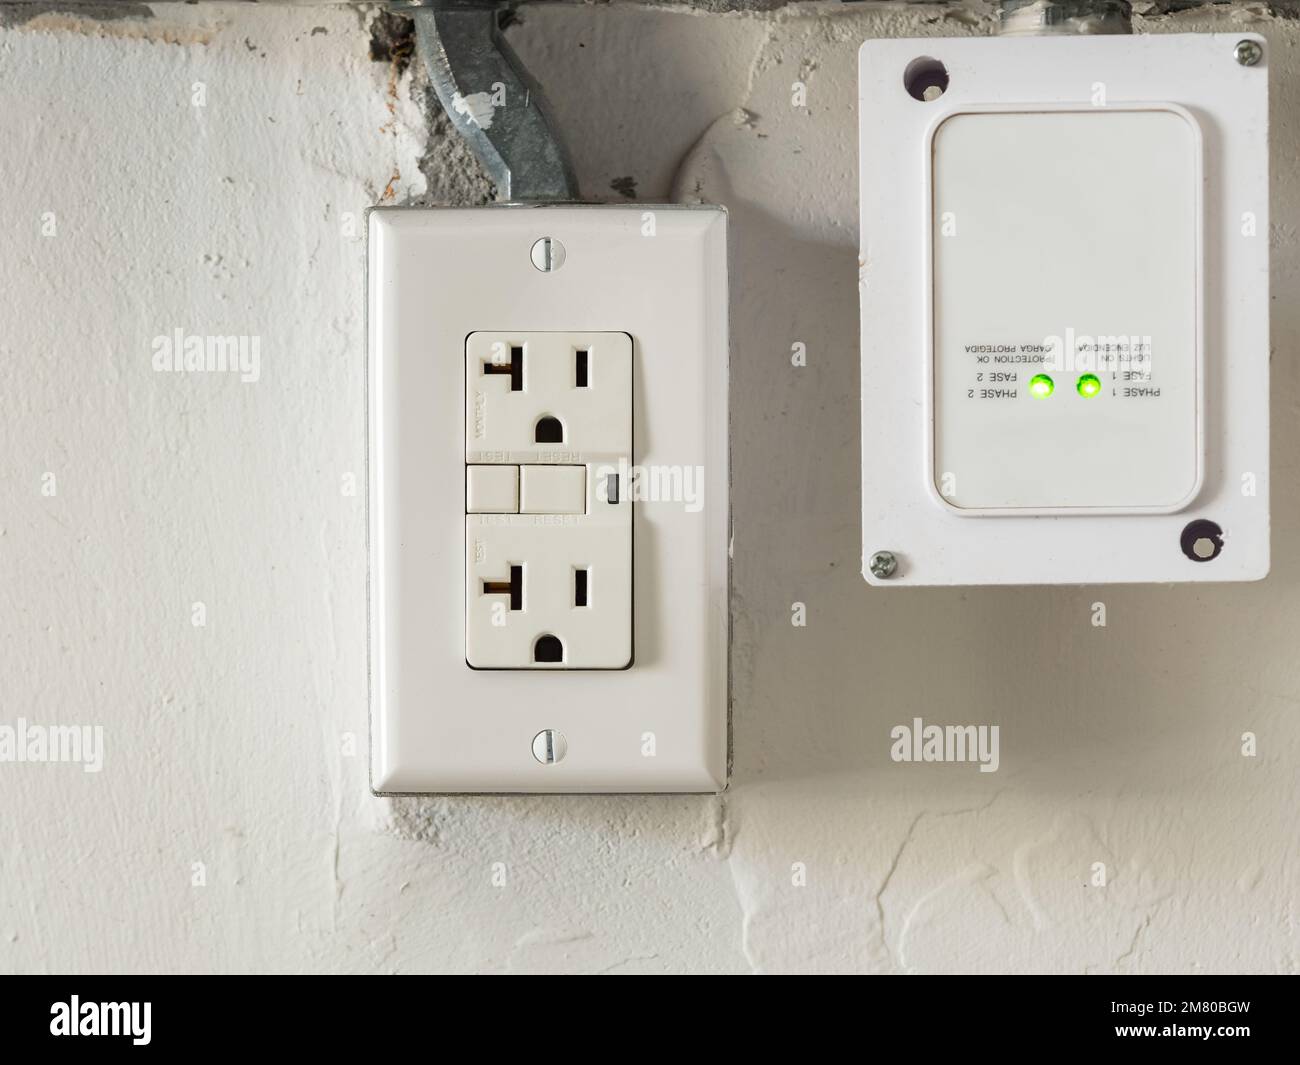 Ground fault interrupter electricity receptacle and wall plate. Residential gfci electric outlet plug with GFI reset button. Stock Photo